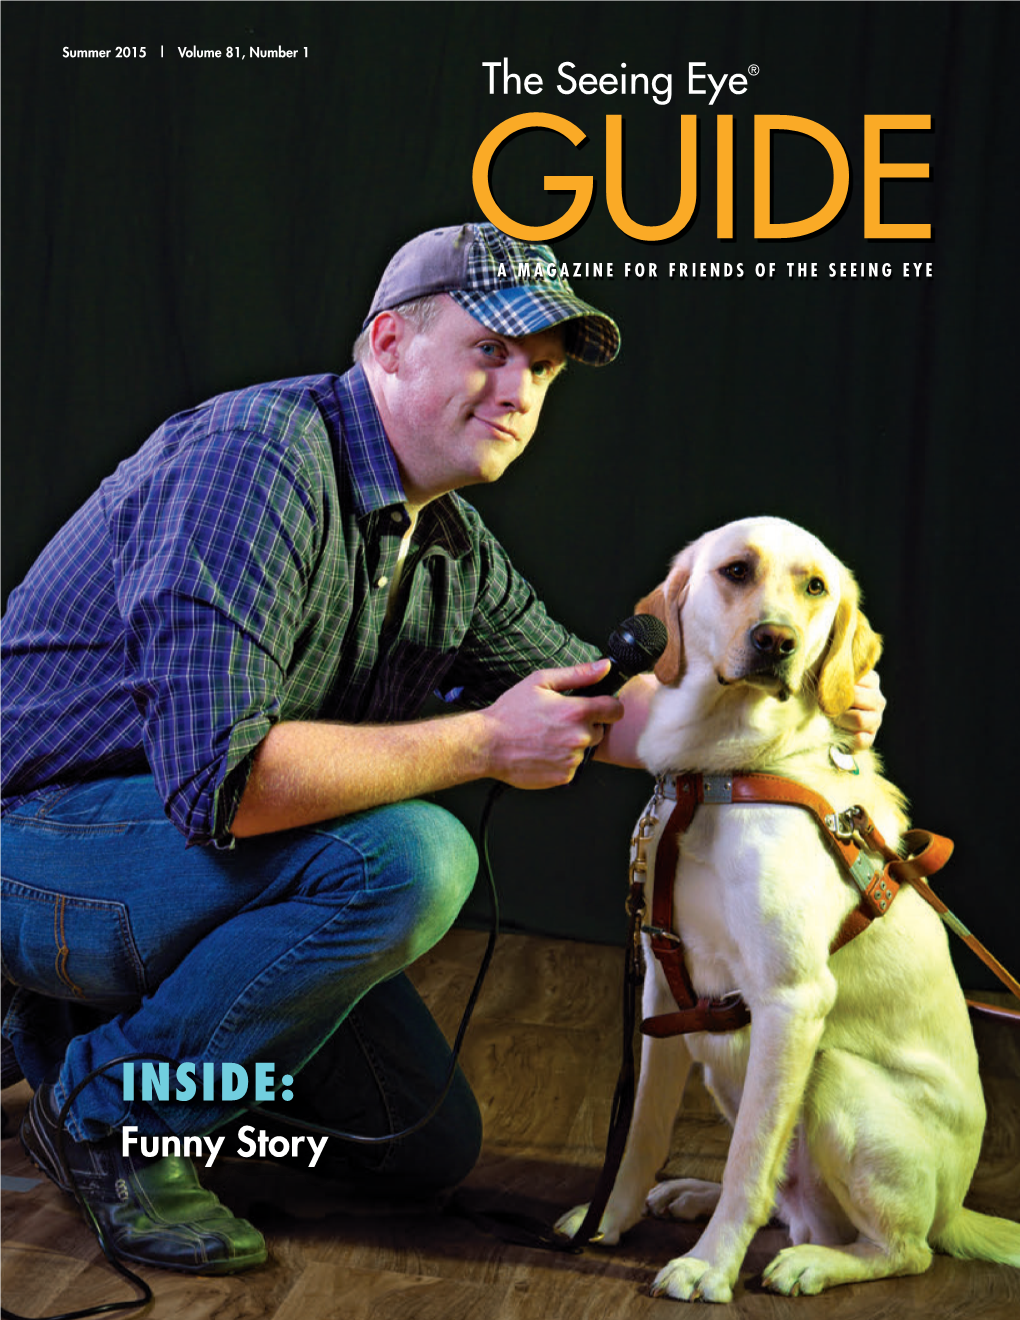 The Guide, Summer 2015